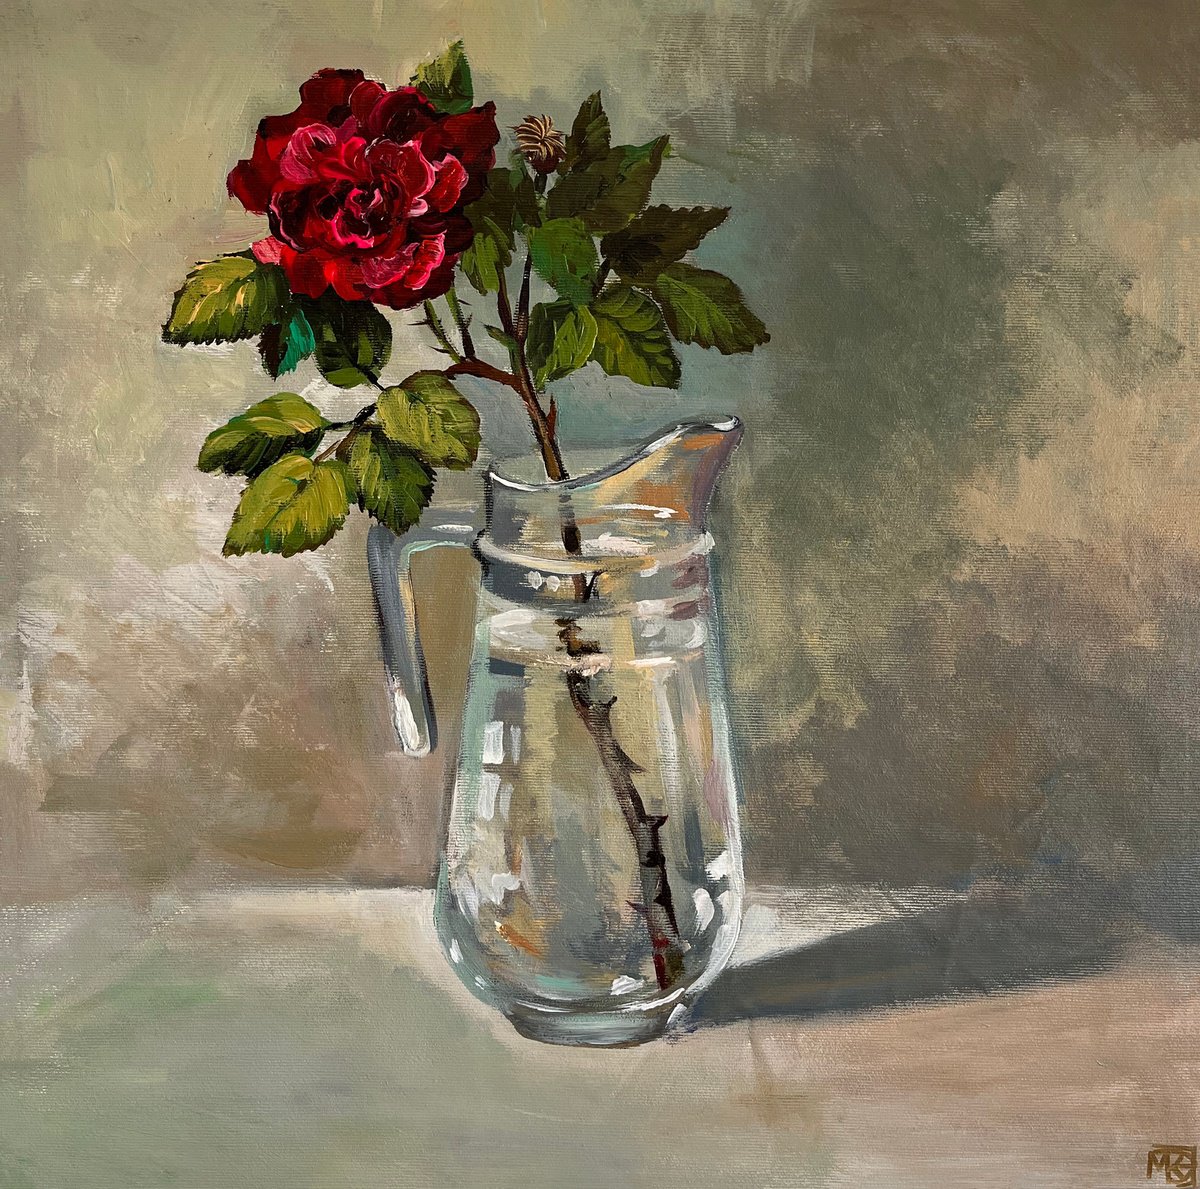 Still life with rose by Maria Kireev